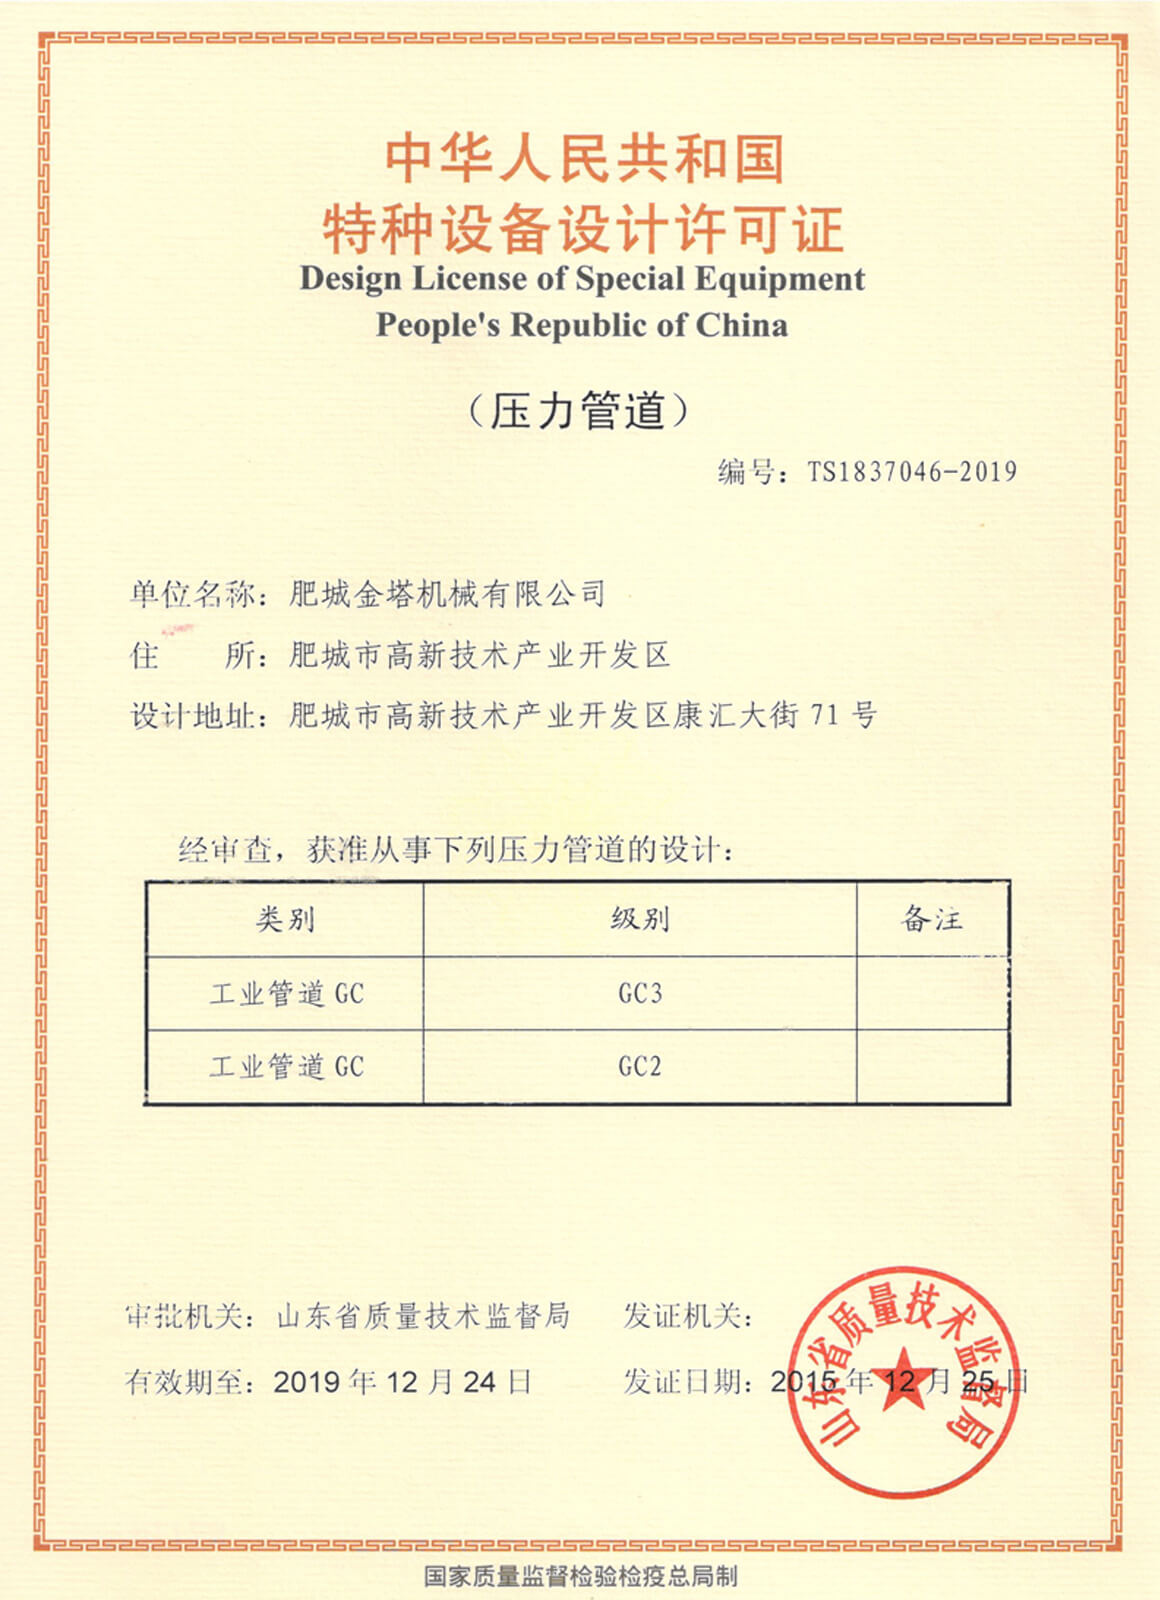 New certificate for pressure piping design